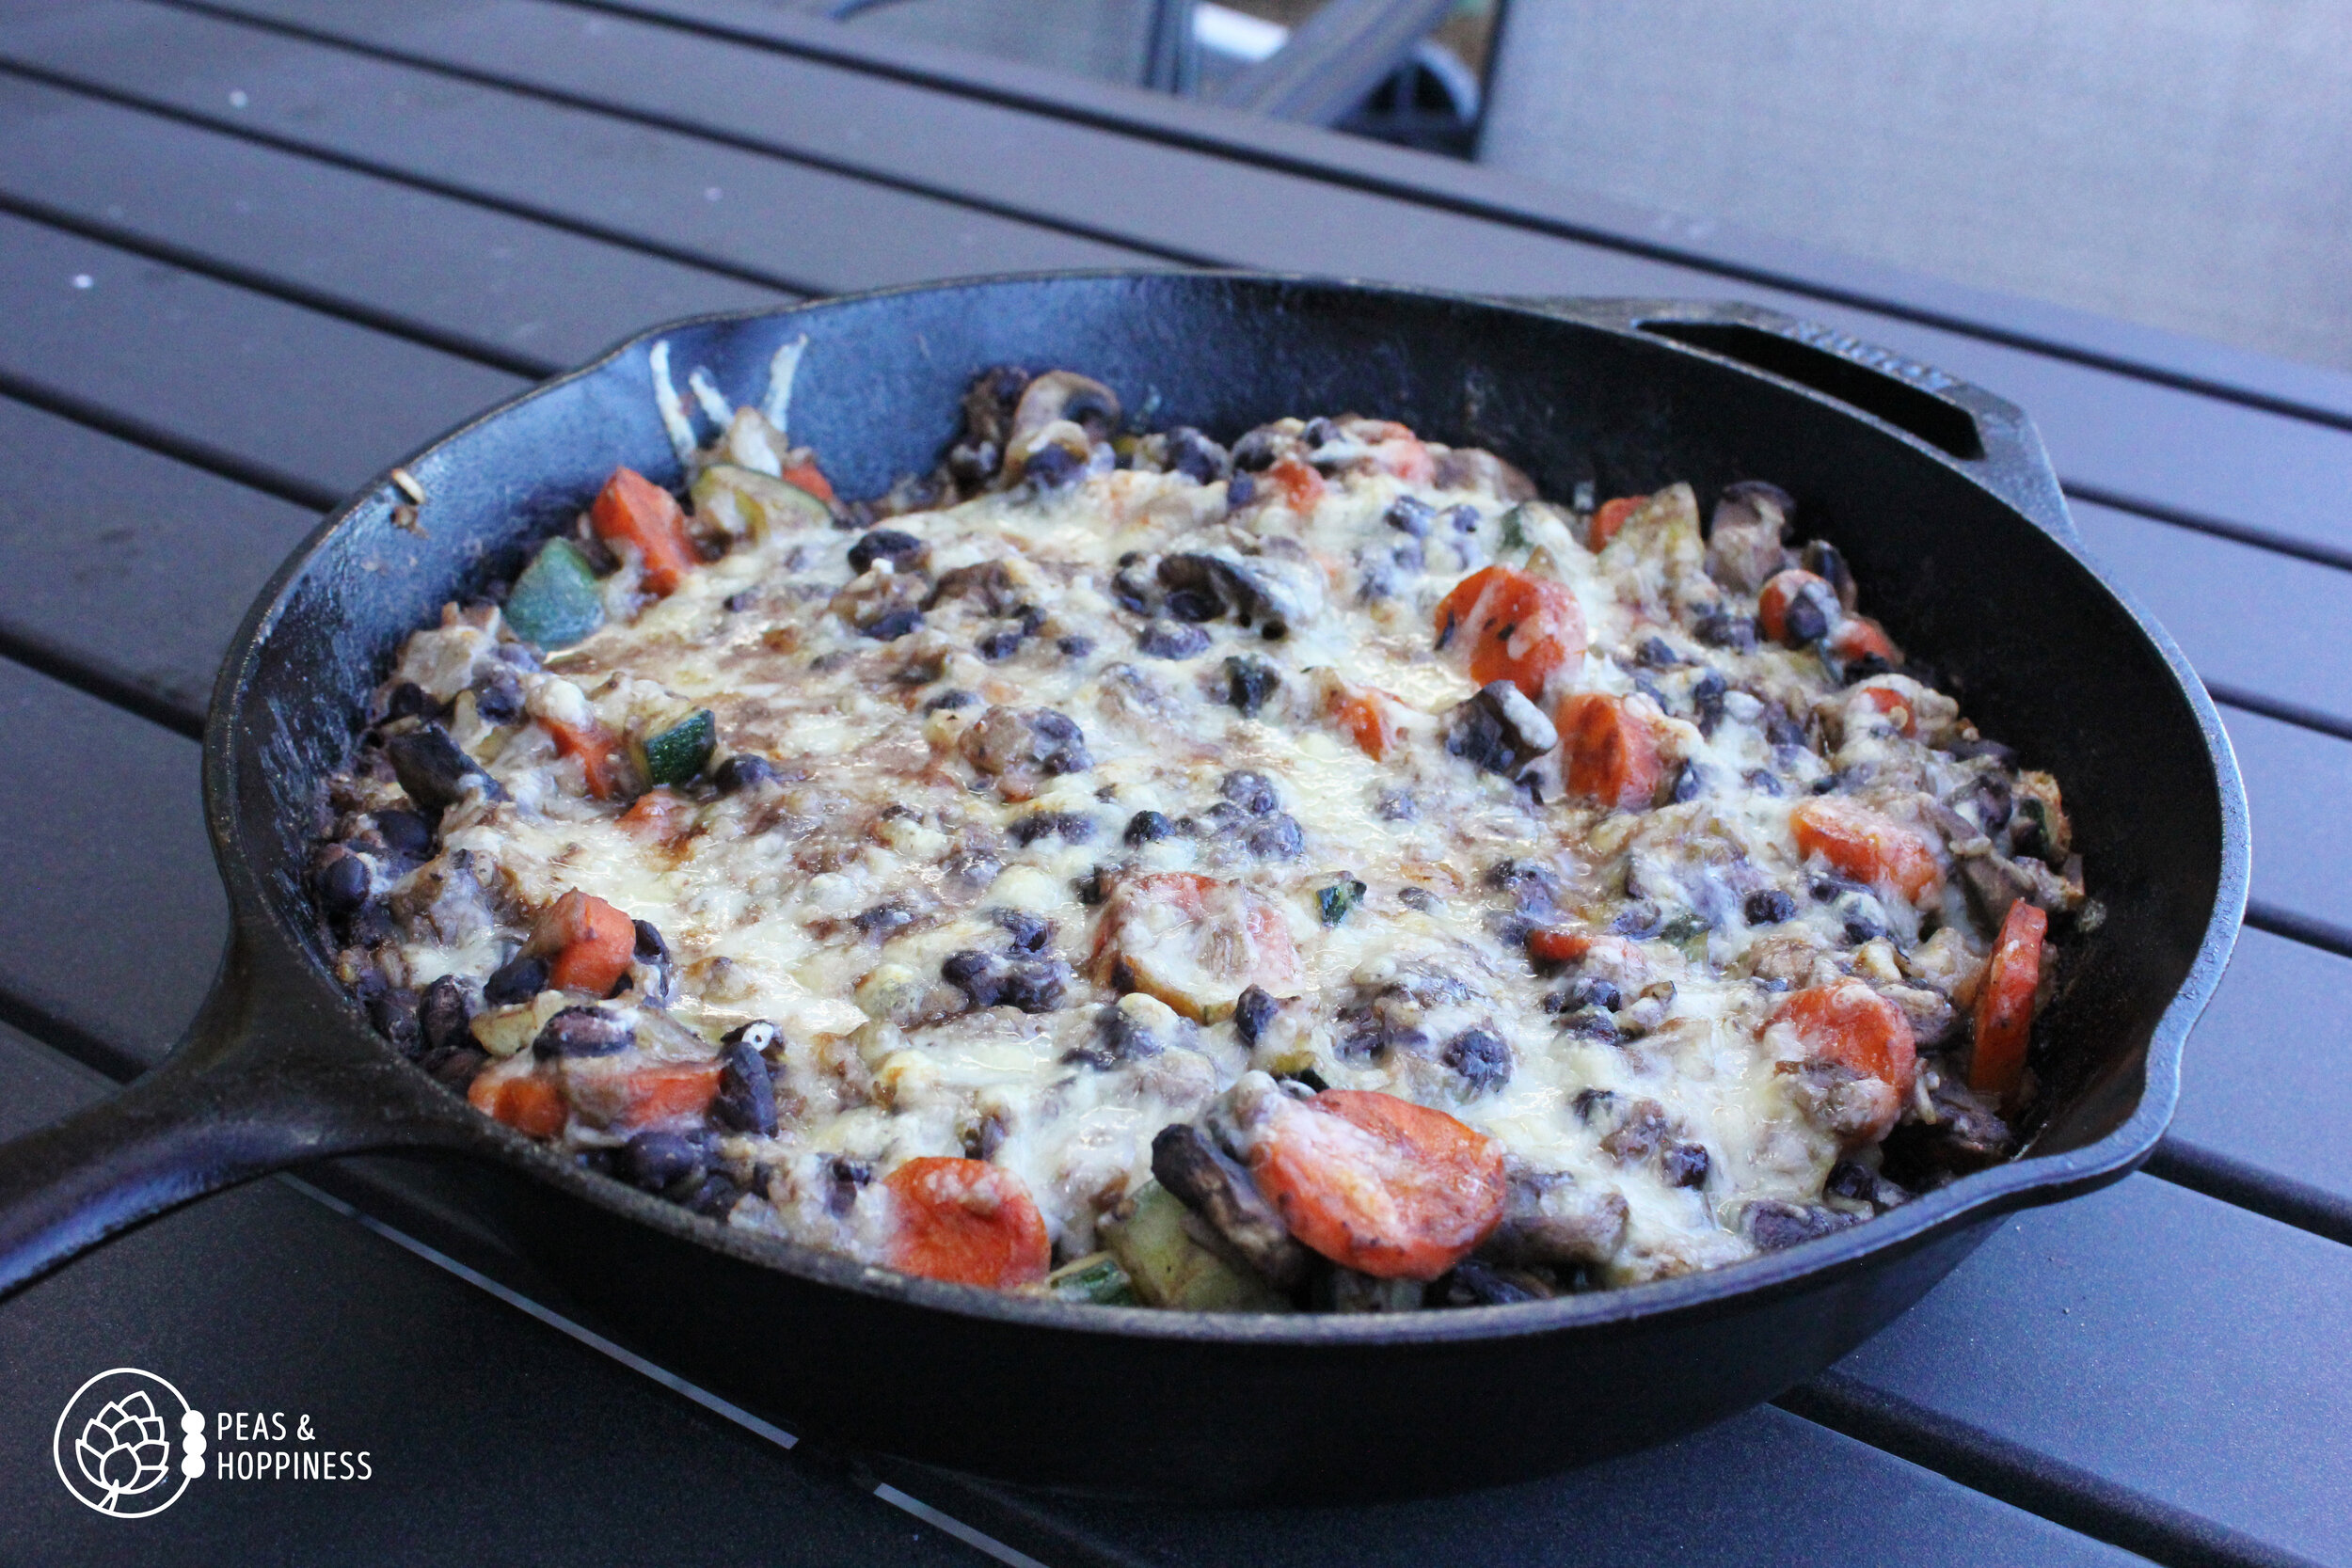 Black Bean &amp; Harvest Vegetable Skillet featured on the Peas &amp; Hoppy Meal Guides, a one-dish meal which can be served as an entree or as a side to round out a flexitarian meal.